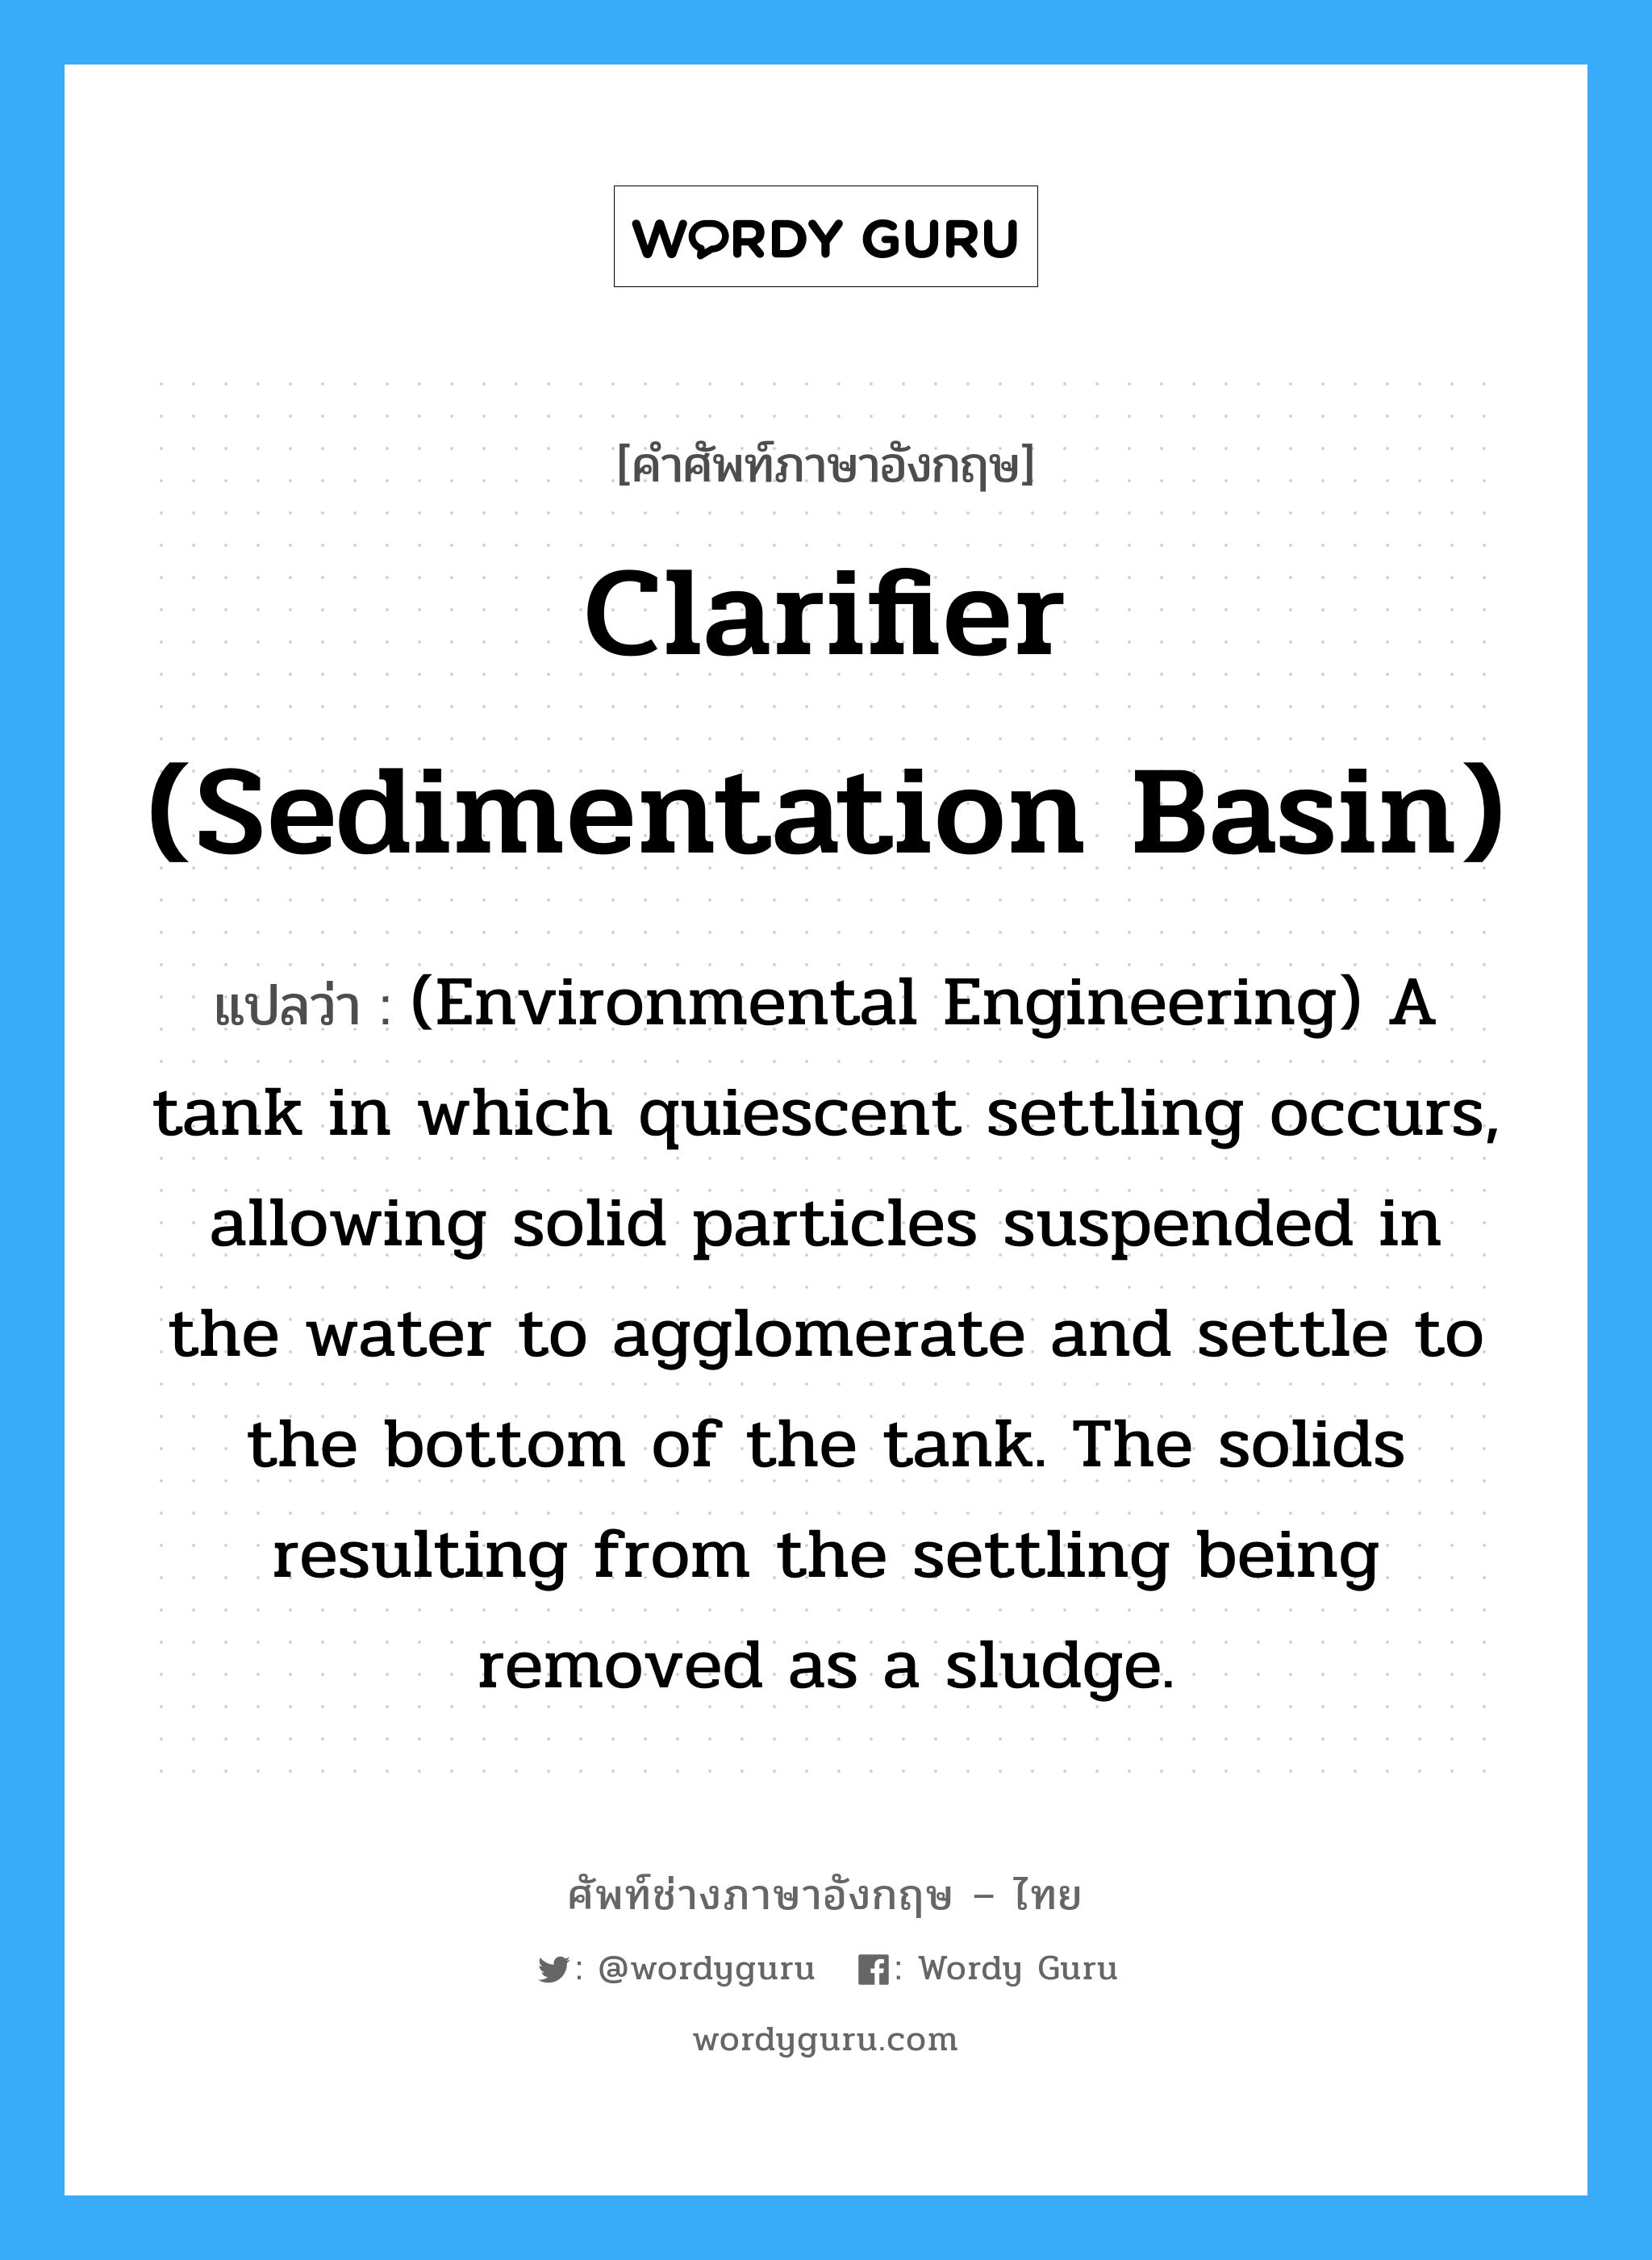 Clarifier (sedimentation basin) แปลว่า?, คำศัพท์ช่างภาษาอังกฤษ - ไทย Clarifier (sedimentation basin) คำศัพท์ภาษาอังกฤษ Clarifier (sedimentation basin) แปลว่า (Environmental Engineering) A tank in which quiescent settling occurs, allowing solid particles suspended in the water to agglomerate and settle to the bottom of the tank. The solids resulting from the settling being removed as a sludge.